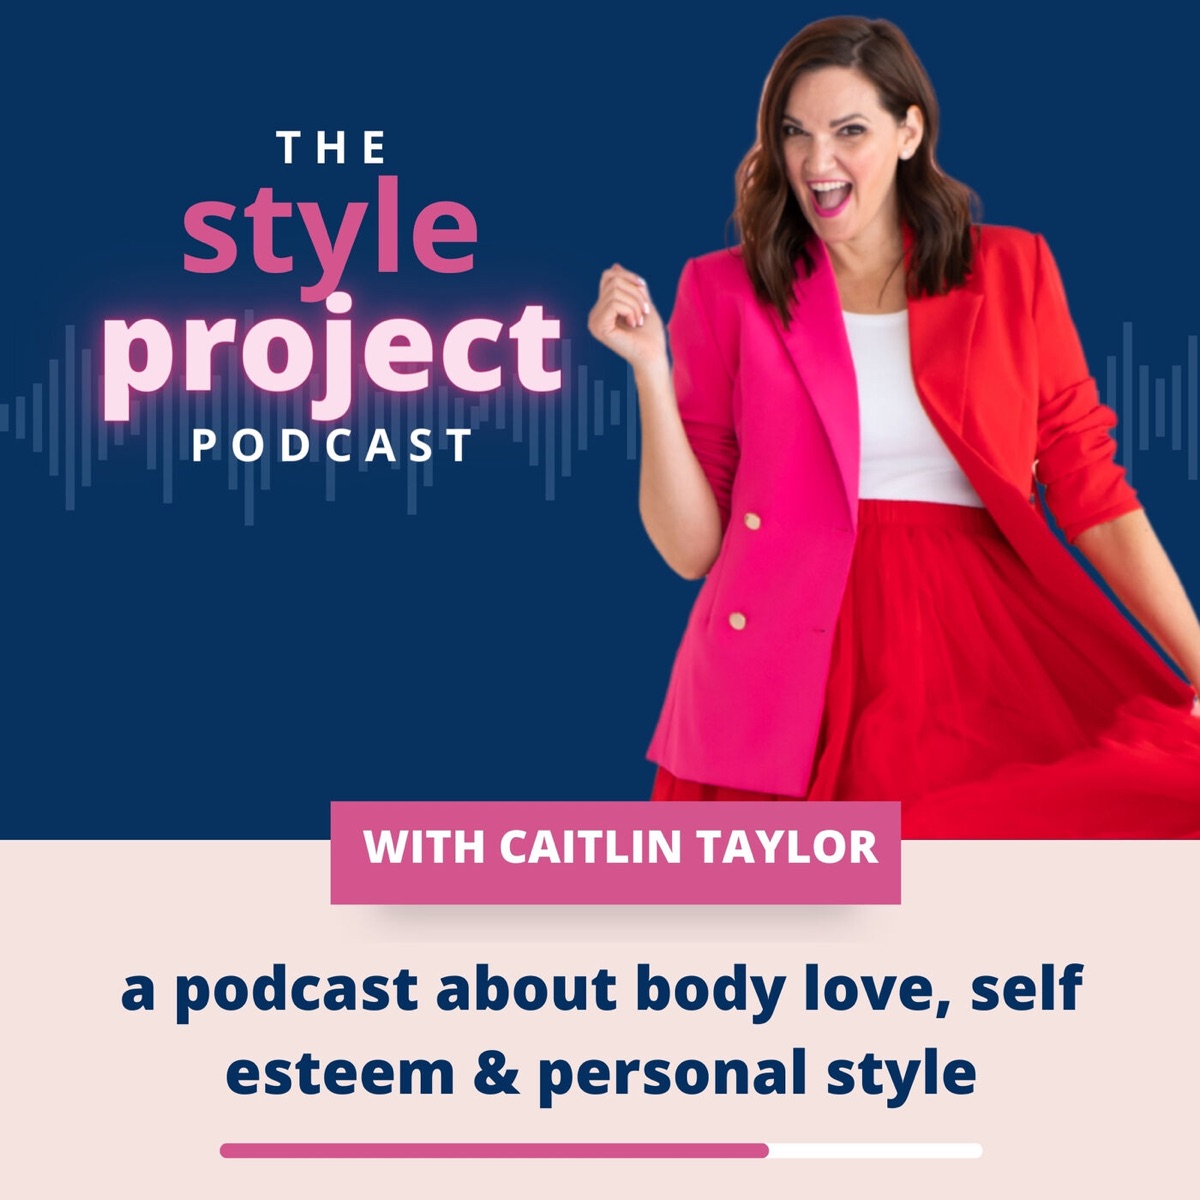 Aussie Amber Porn - Amber Peebles â€“ The Style Project: a podcast about body love, self esteem  and personal style â€“ Podcast â€“ Podtail